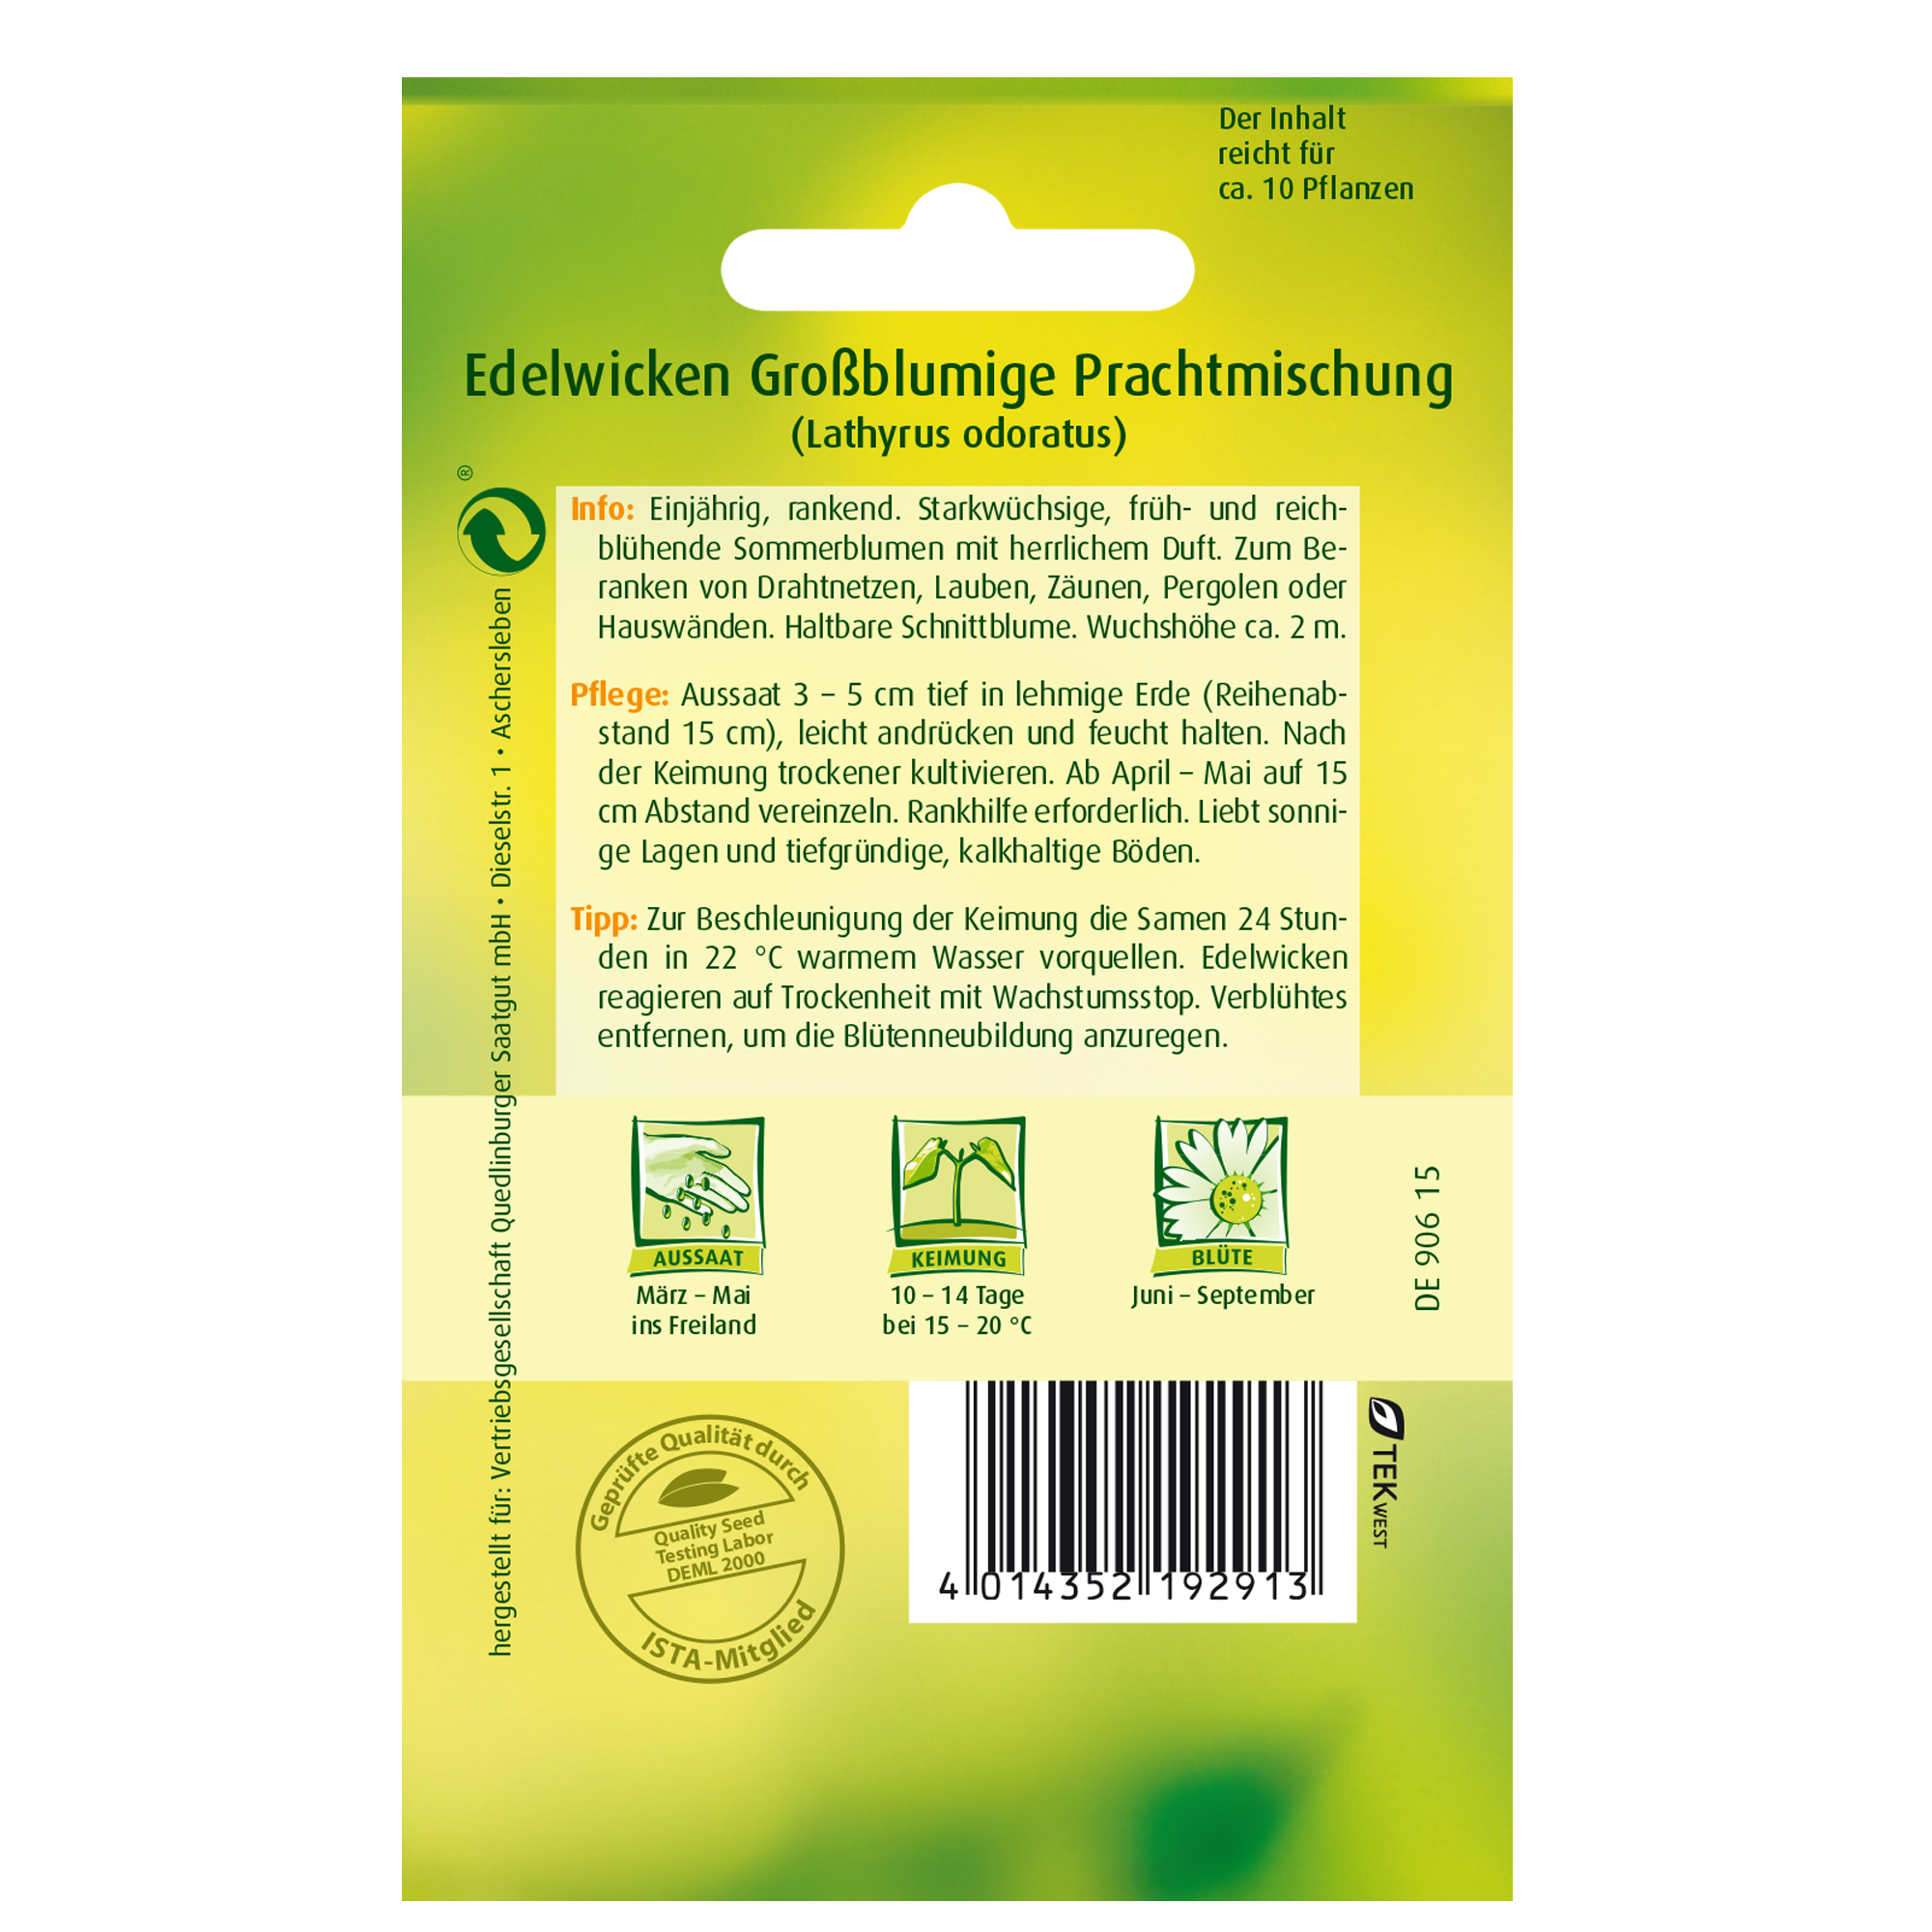 Edelwicken großblumig + product picture